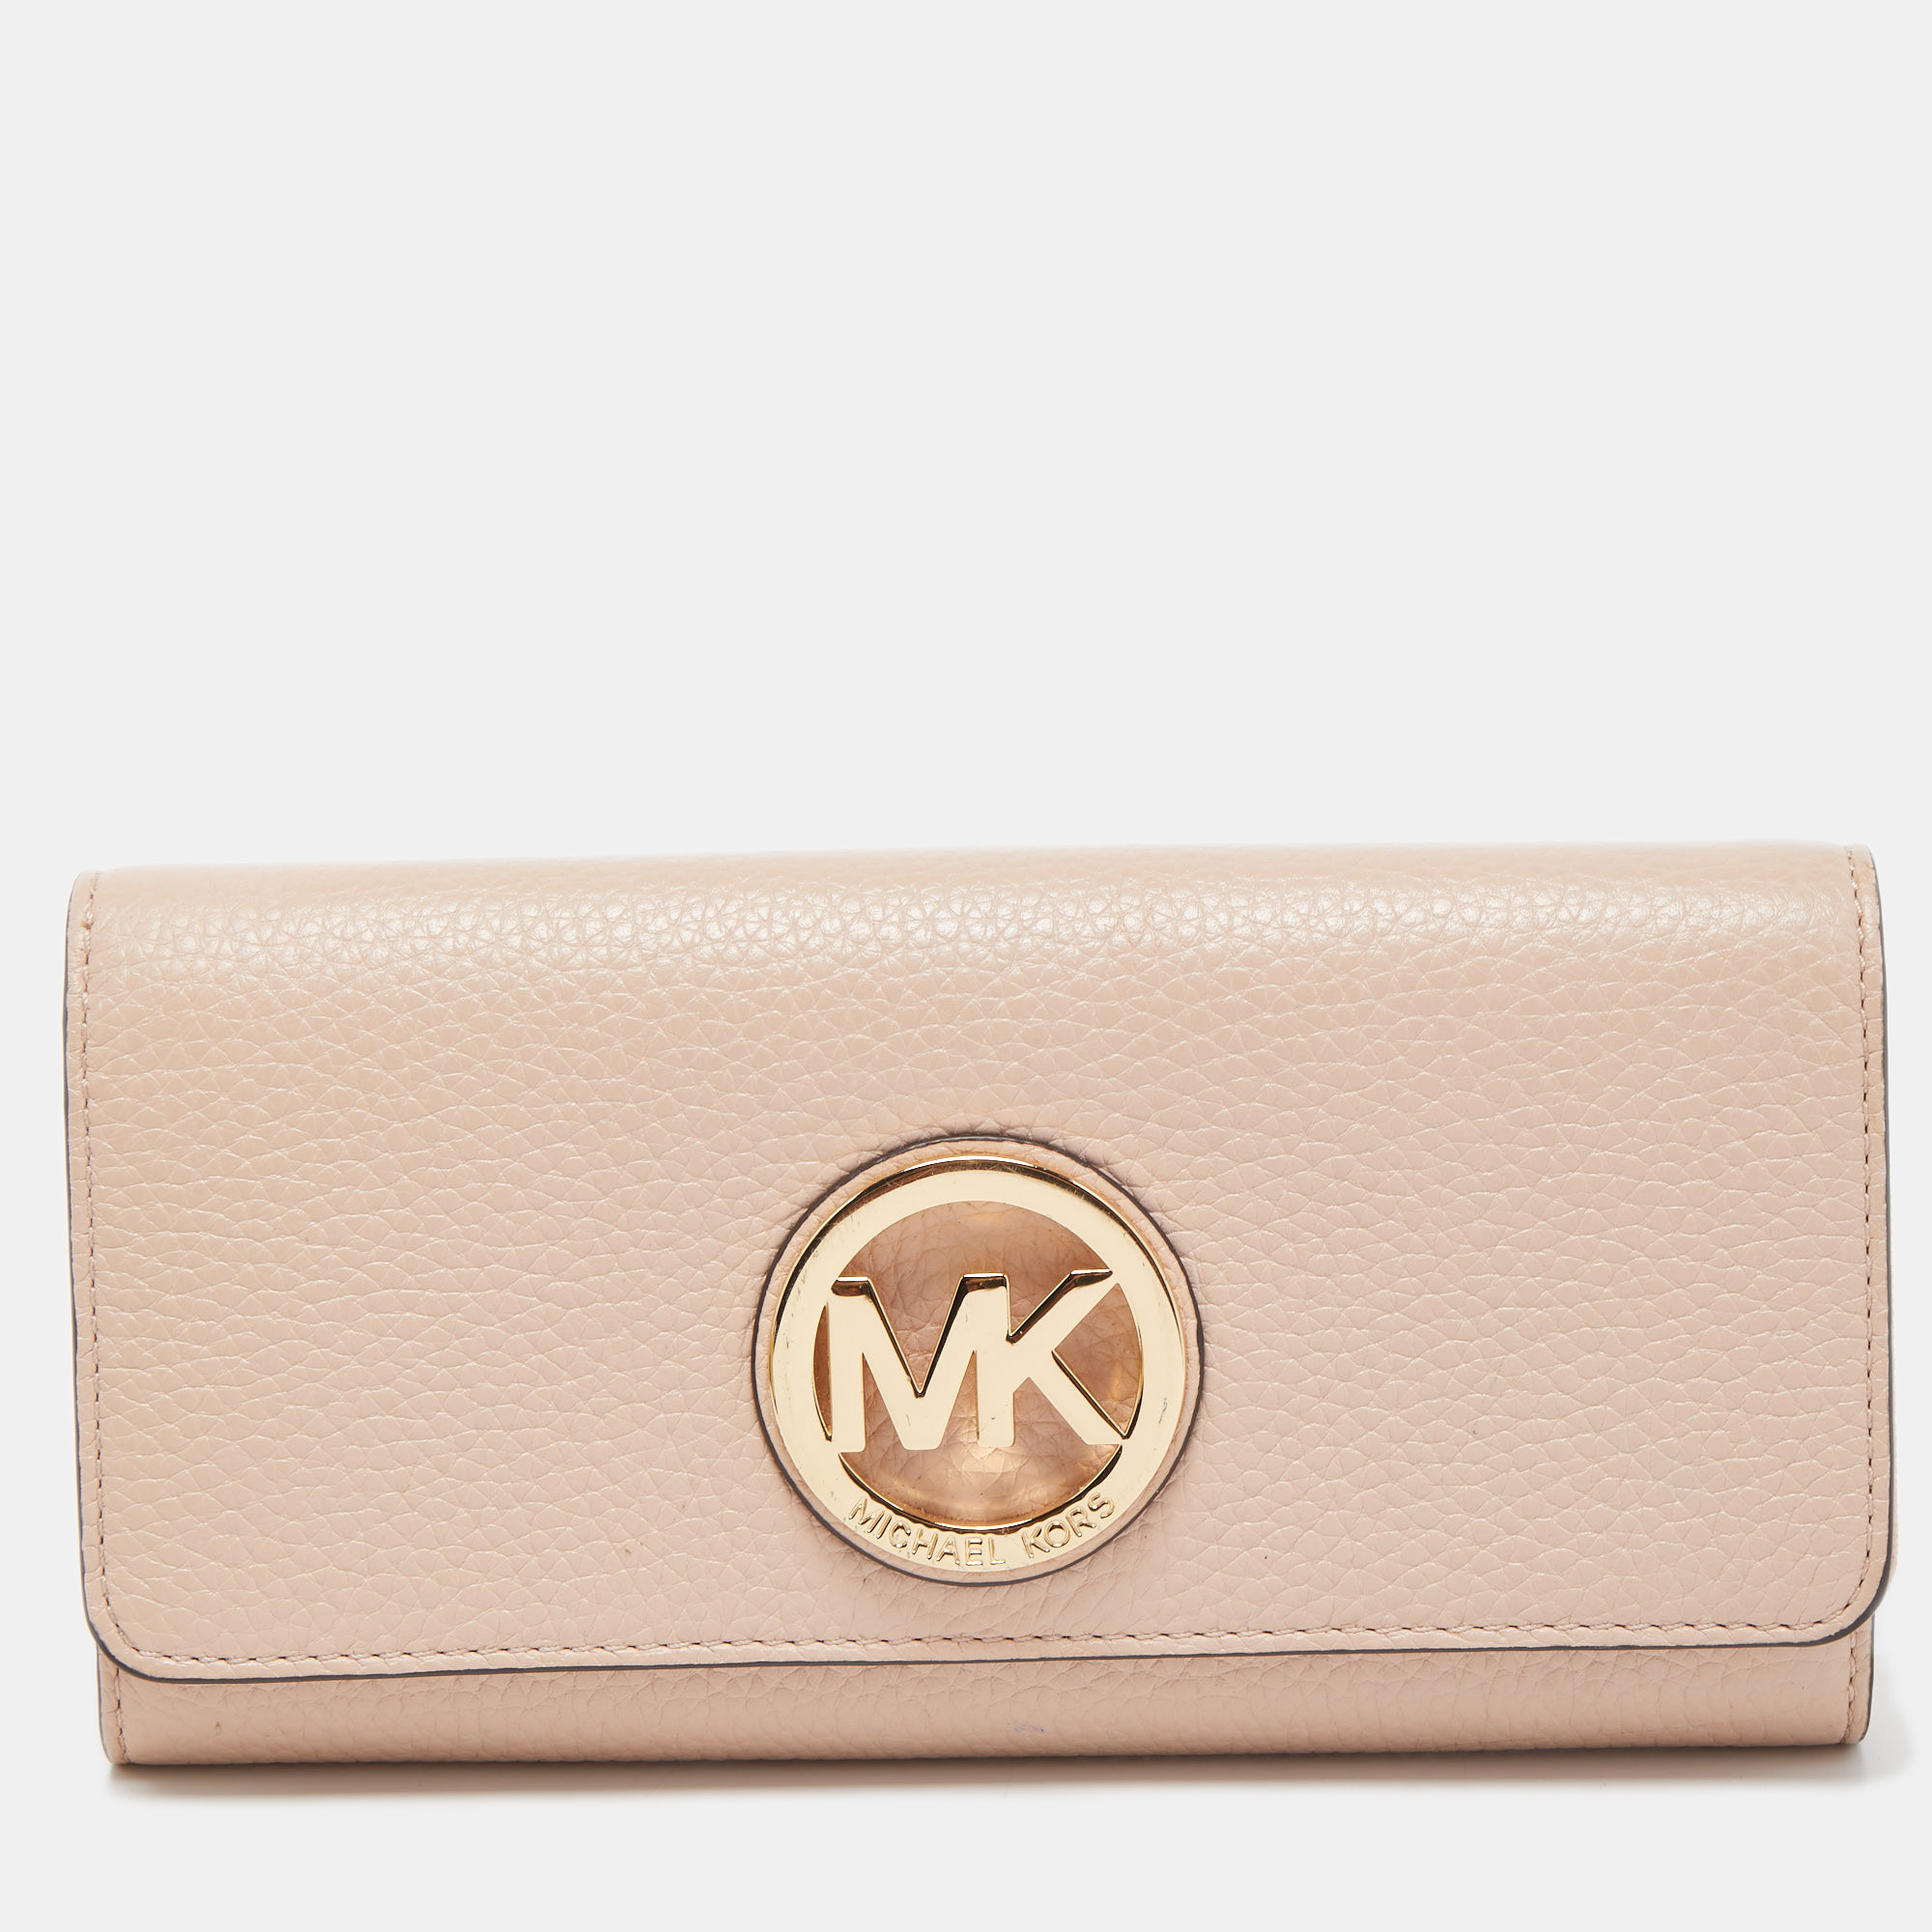 michael kors pink leather fulton flap continental wallet